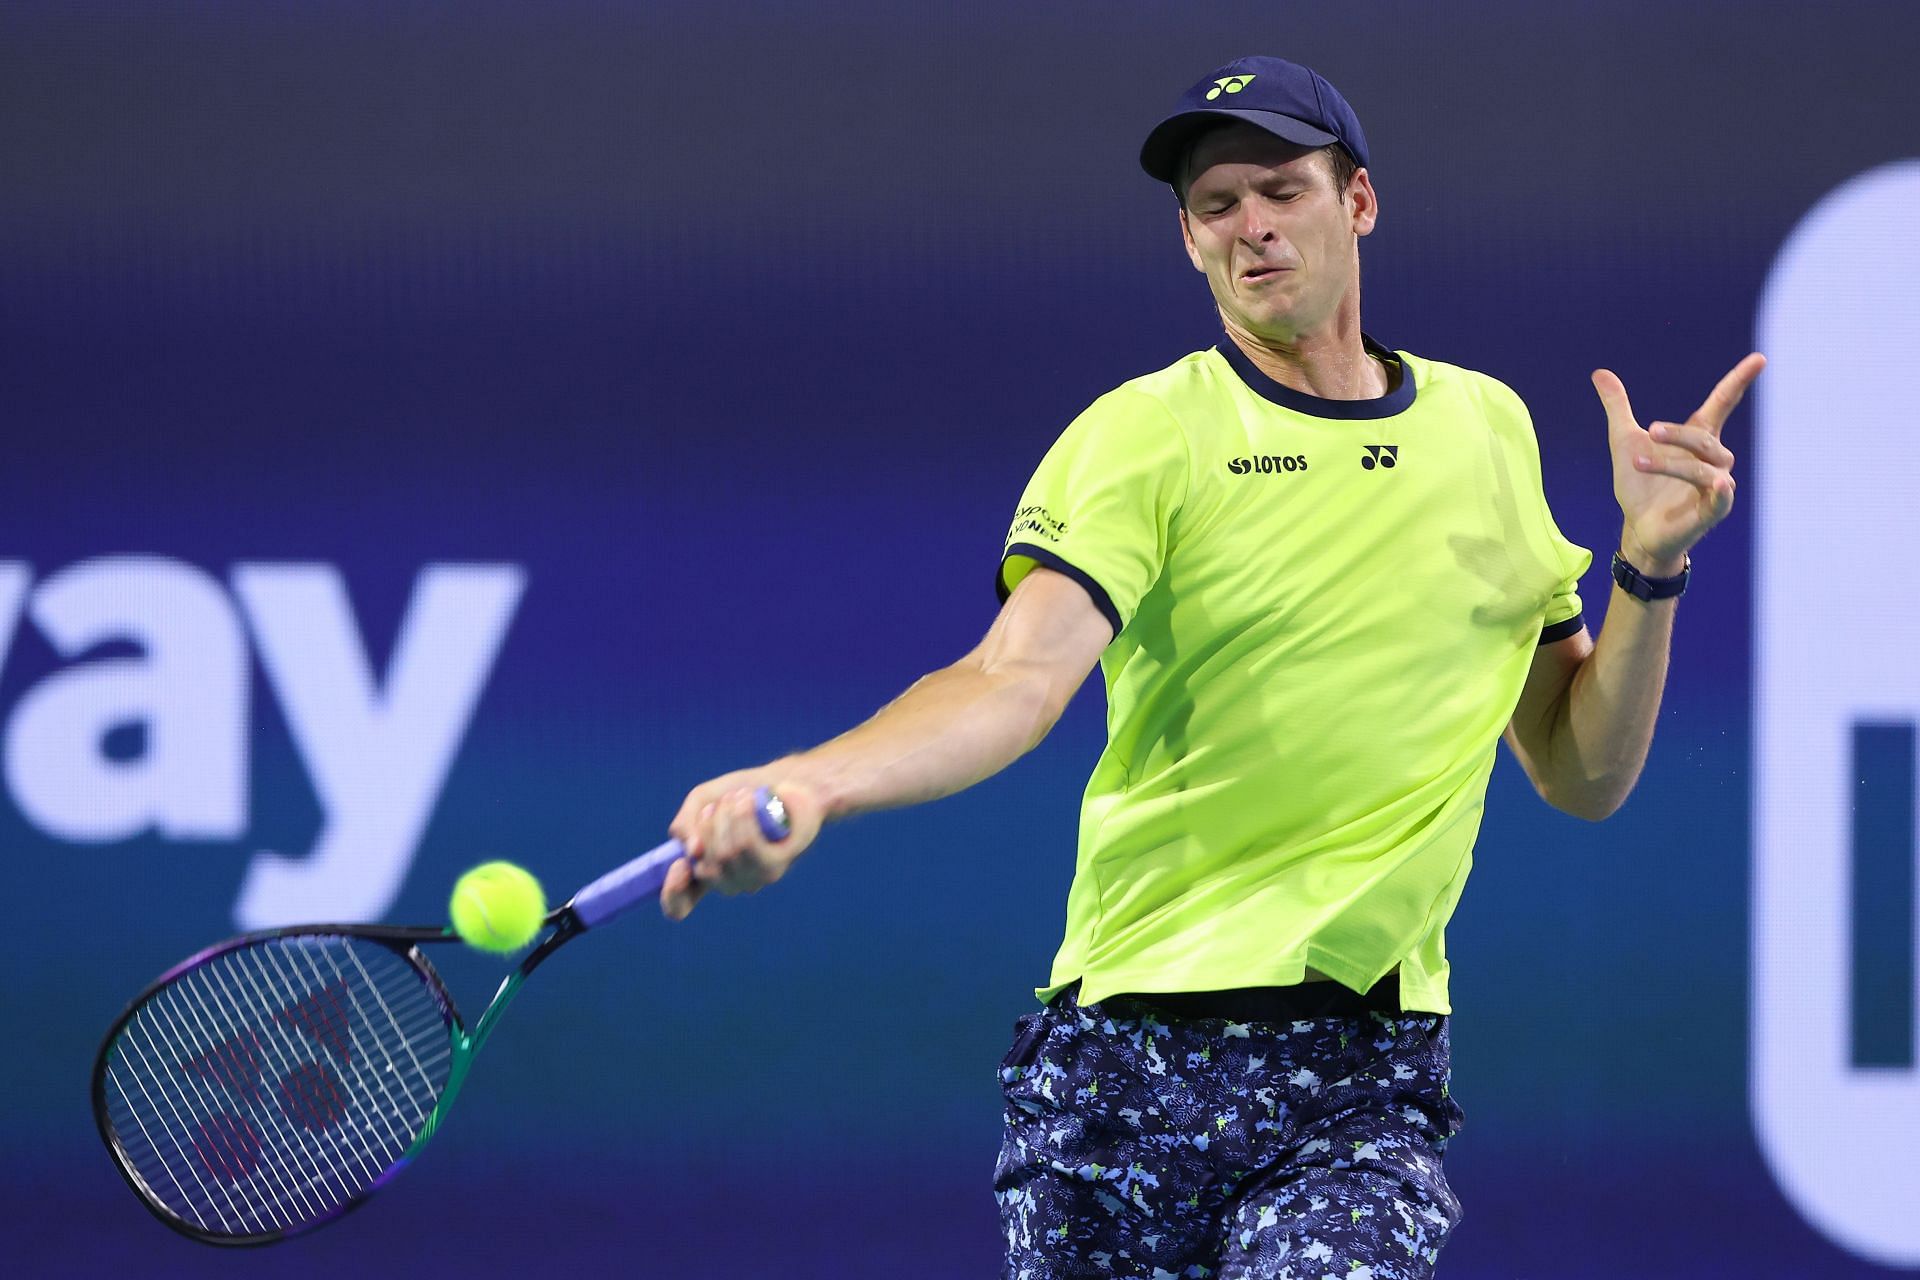 Hubert Hurkacz will look to reach the semifinals of the Monte-Carlo Masters